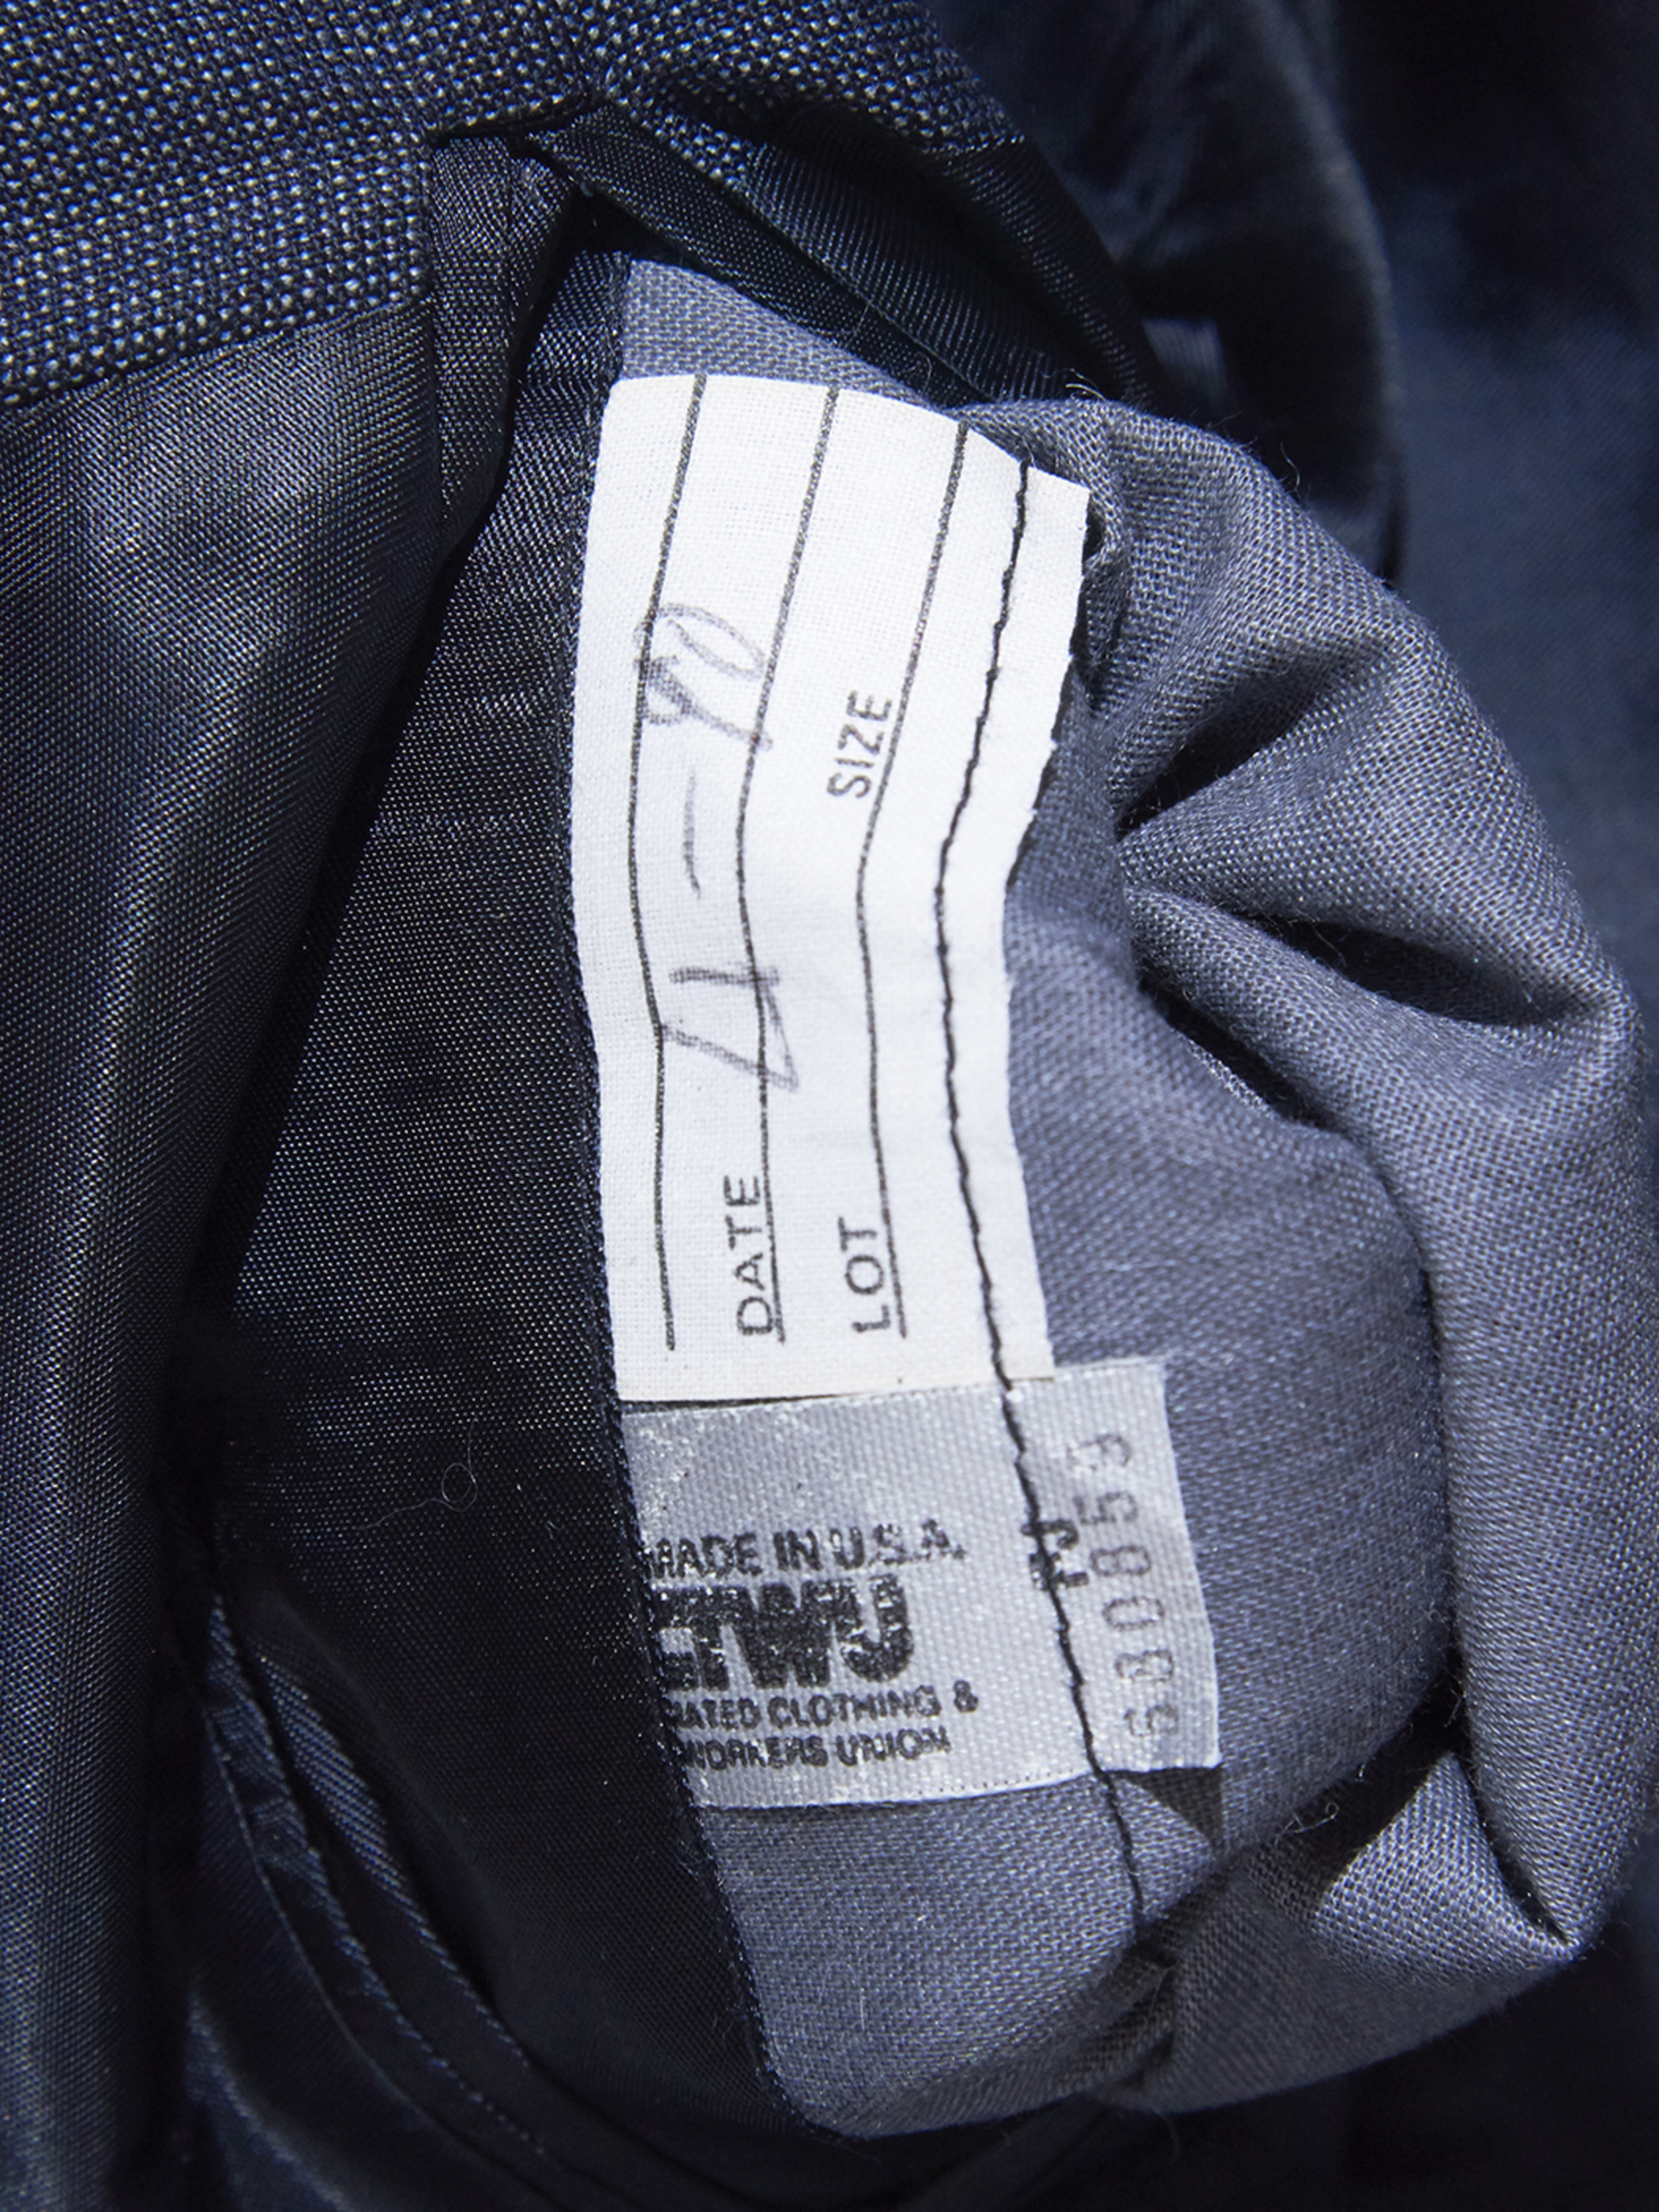 1980s "BROOKS BROTHERS" 2piece No.1 sack suit -CHACOAL-